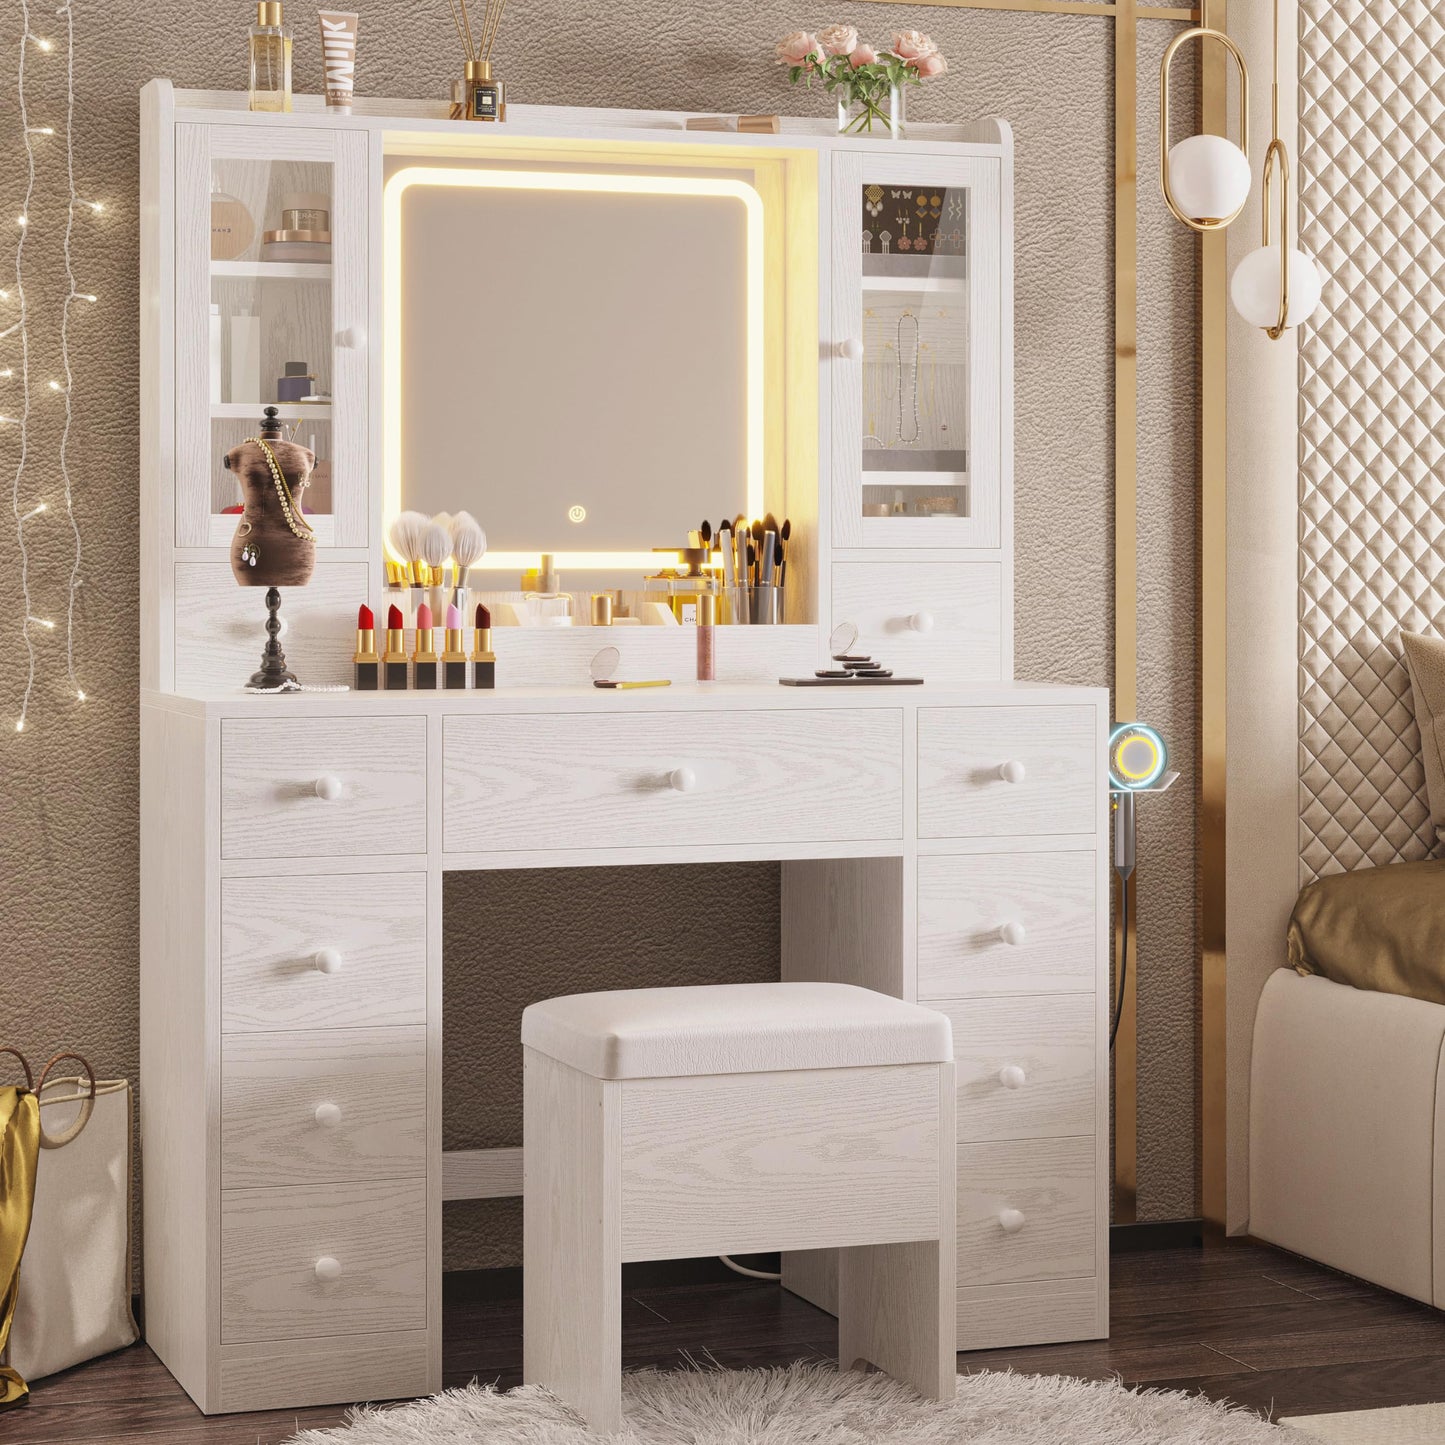 IRONCK Vanity Desk with LED Lights Mirror and Charging Station, Makeup Vanity Table with Jewelry Armoire, Storage Bench, and 11 Drawers, White